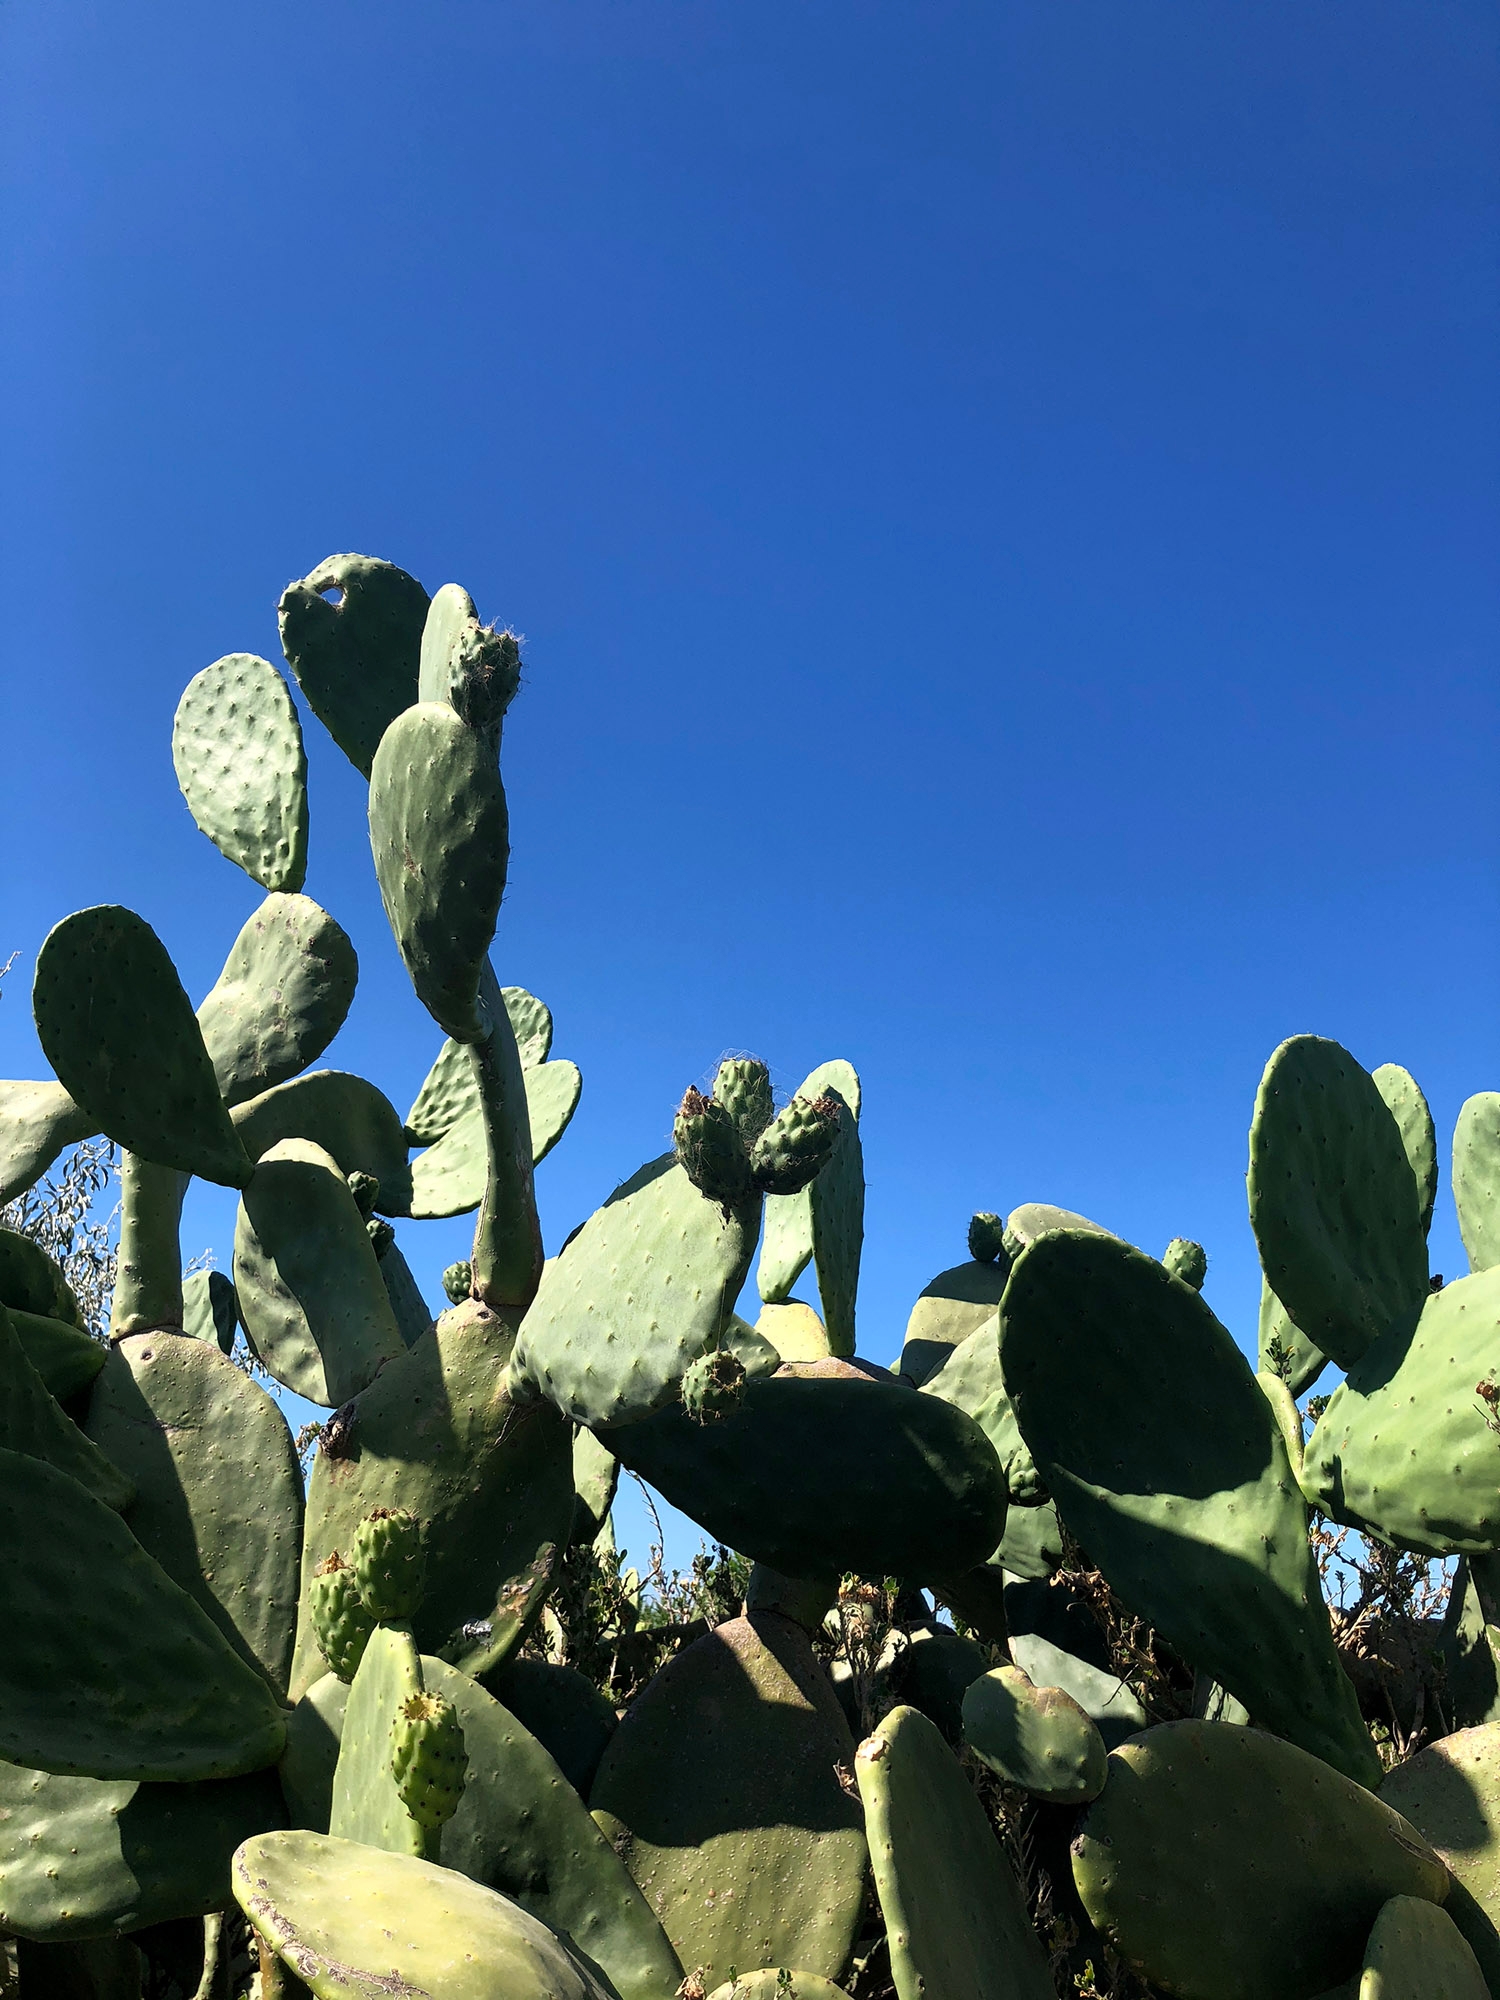 Cactus leaves and the clear blue sky